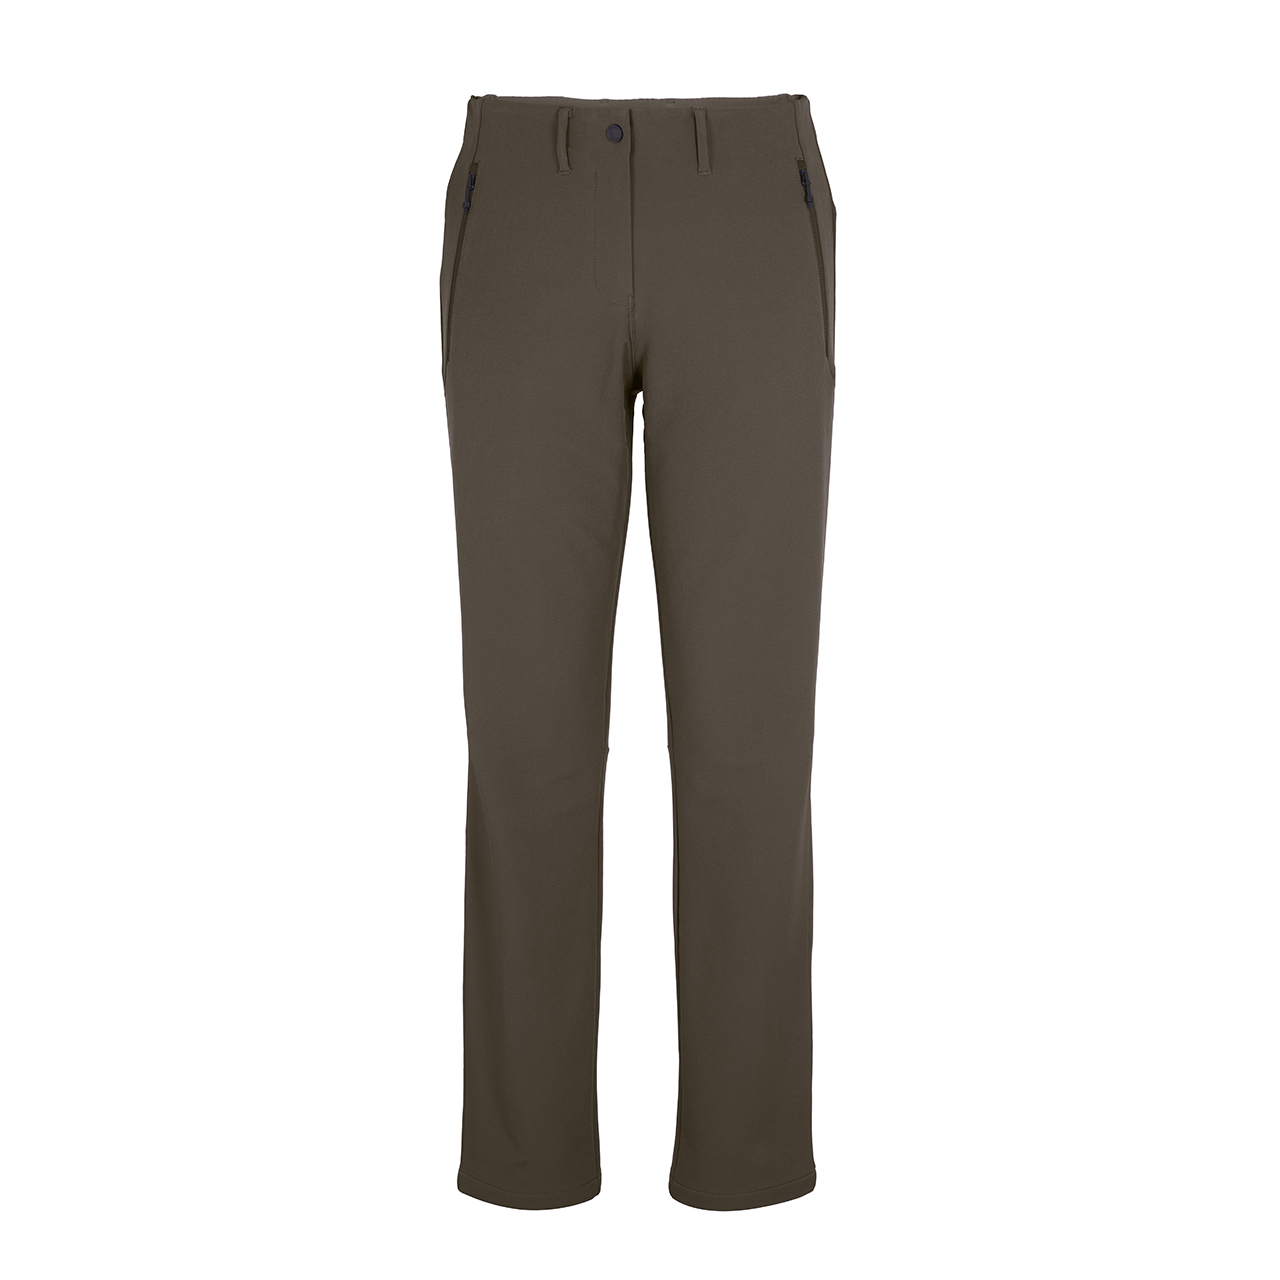 Men’s Striders Hiking Trousers